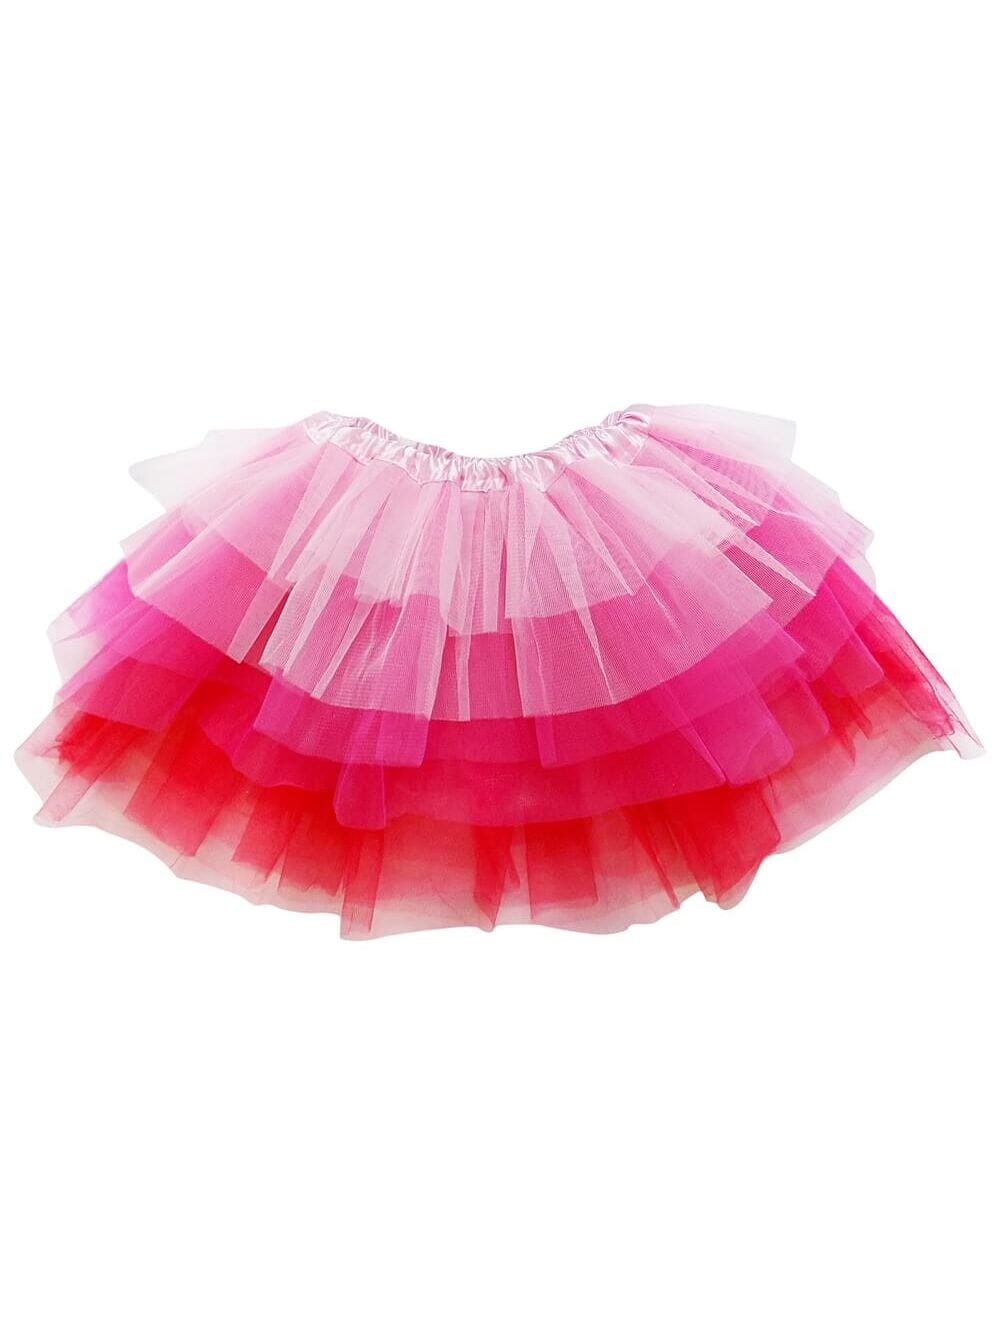 Pink, Hot Pink, Red 6 Layer Tutu Skirt Costume for Girls, Women, Plus - Sydney So Sweet